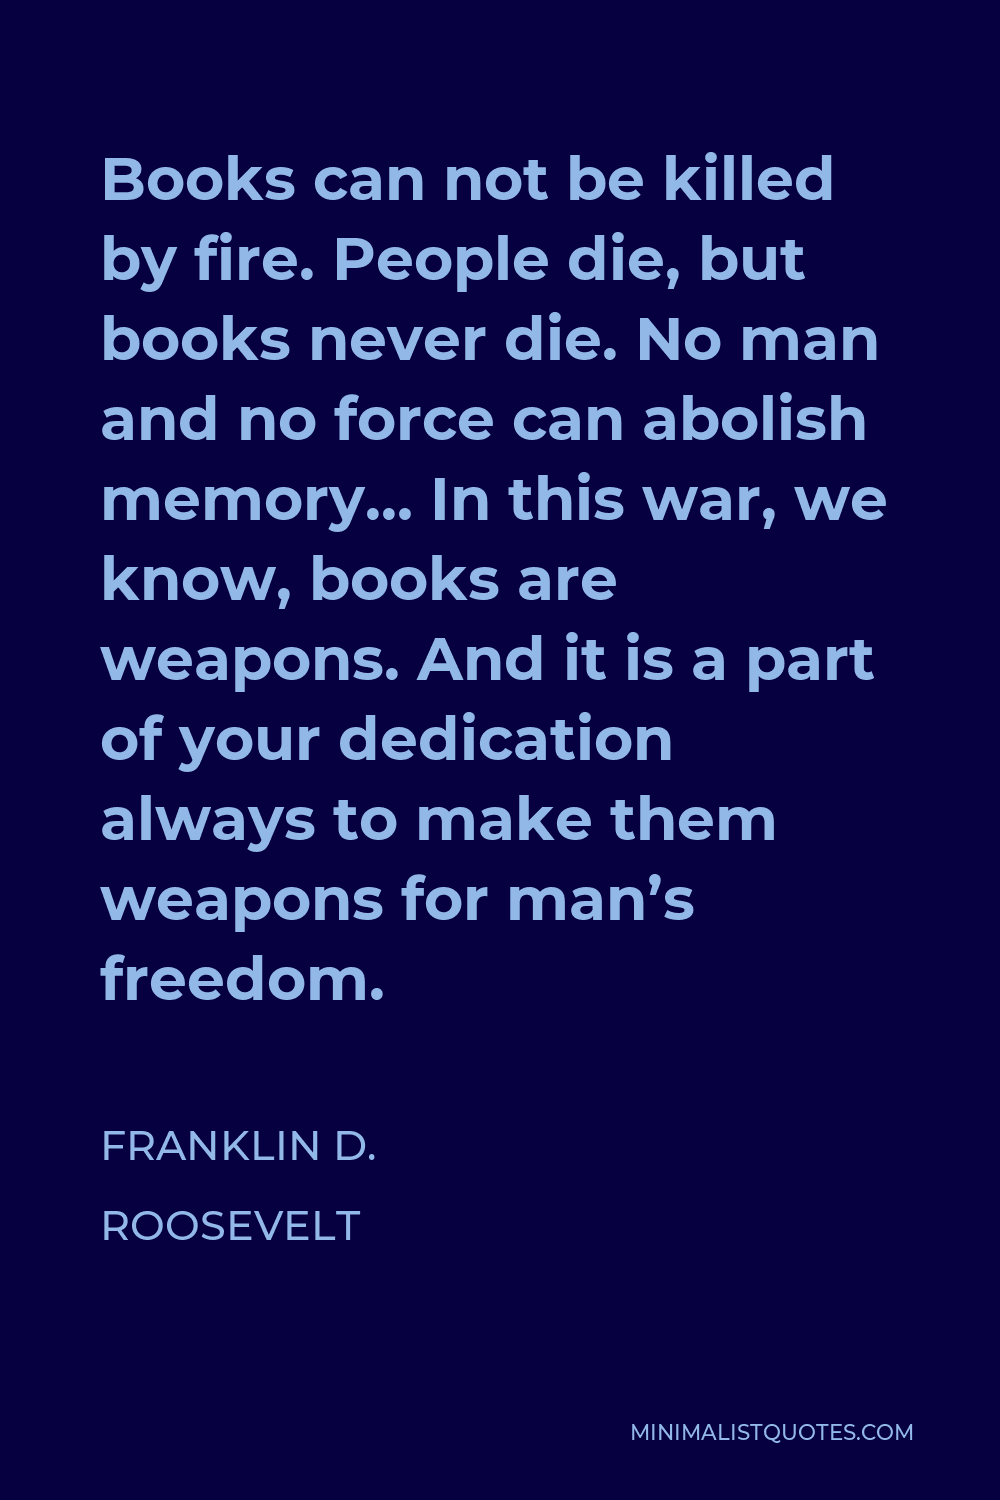 Franklin D. Roosevelt Quote - Books can not be killed by fire. People die, but books never die. No man and no force can abolish memory… In this war, we know, books are weapons. And it is a part of your dedication always to make them weapons for man’s freedom.